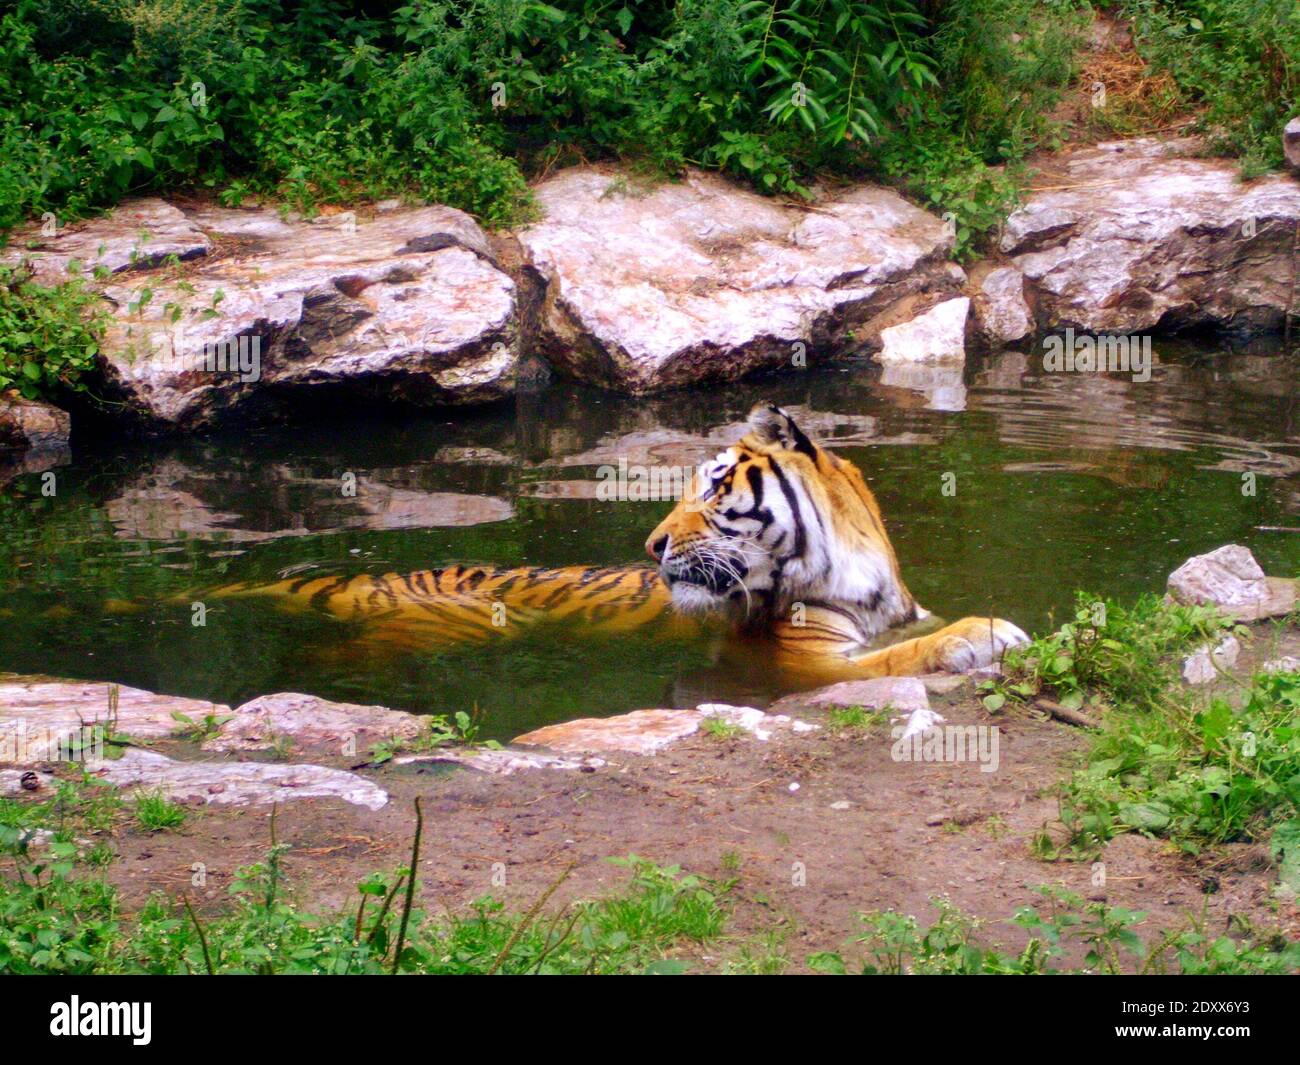 Animals at a zoo in Poznan Poland Stock Photo - Alamy